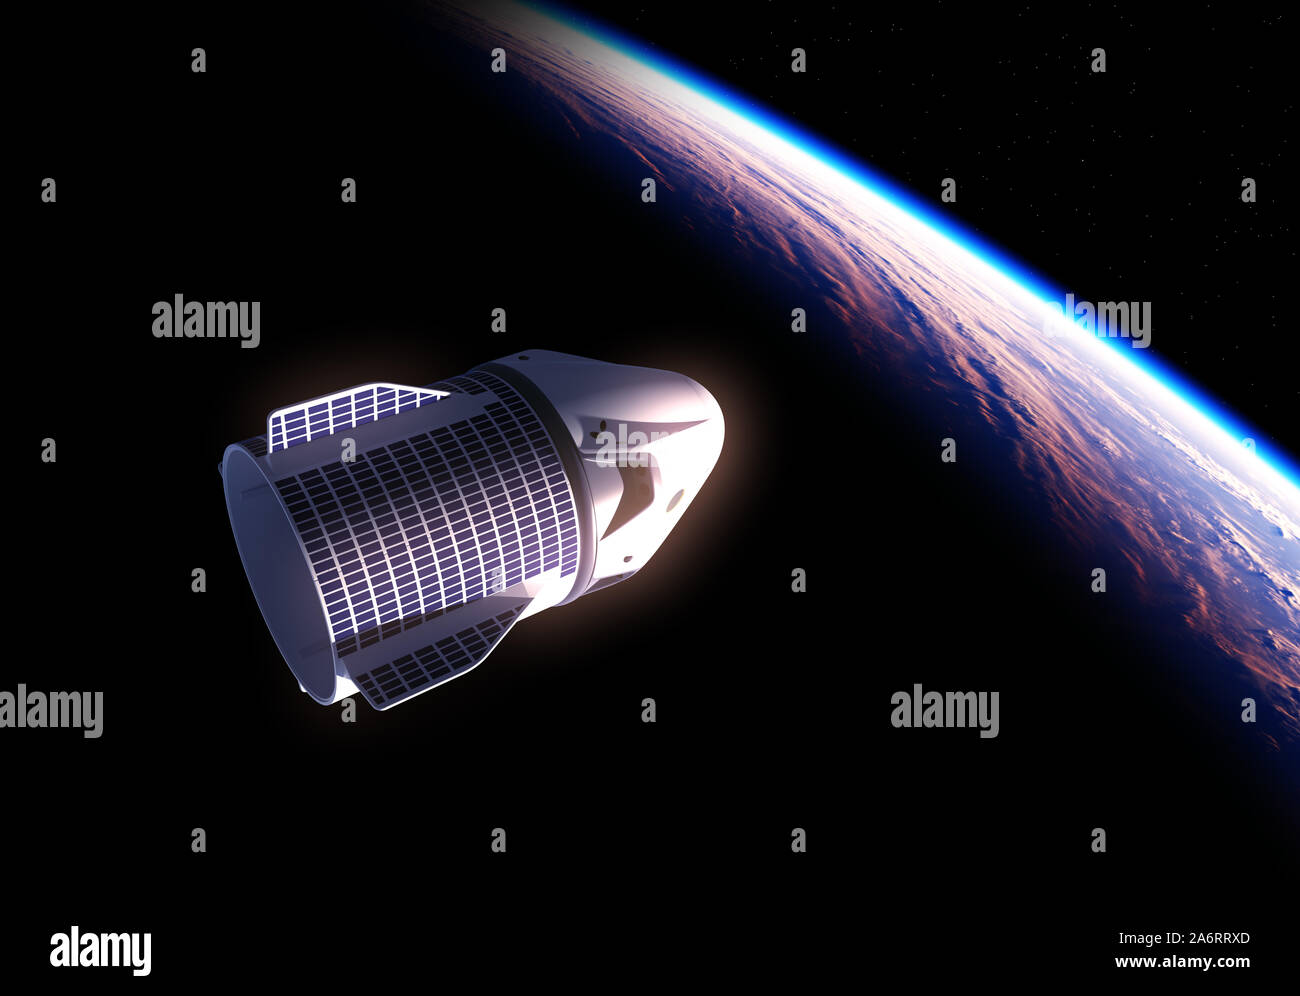 Commercial Spaceship In The Shadow Of Planet Earth. 3D Illustration. Stock Photo